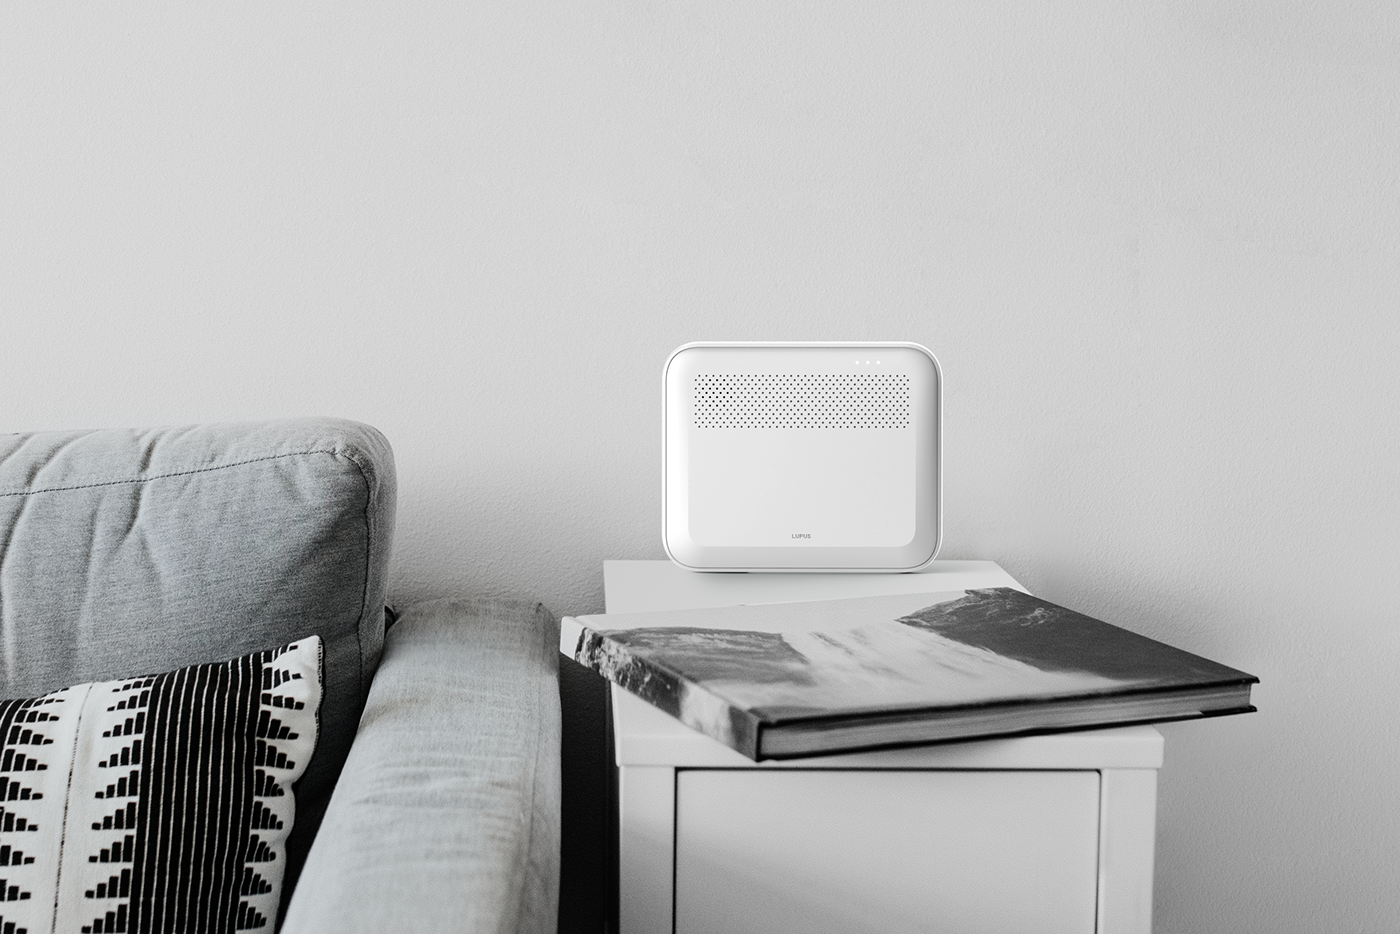 White Consumer electronic Smart home simplicity product design  lupus